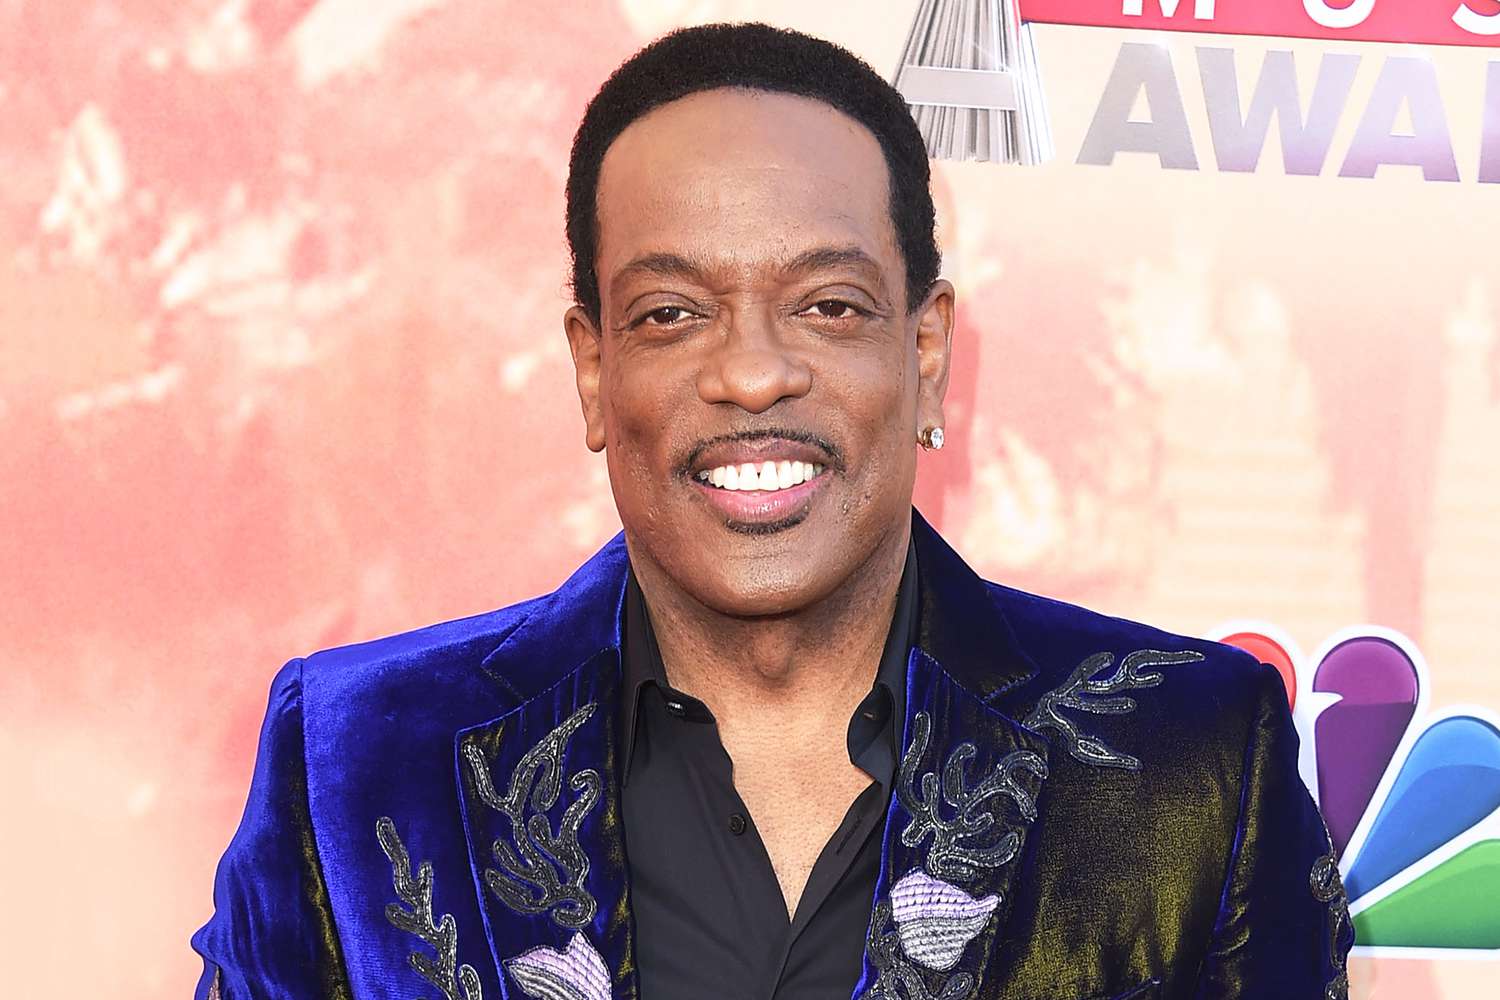 Charlie Wilson arrives at the iHeartRadio Music Awards at The Shrine Auditorium in Los Angeles, California.